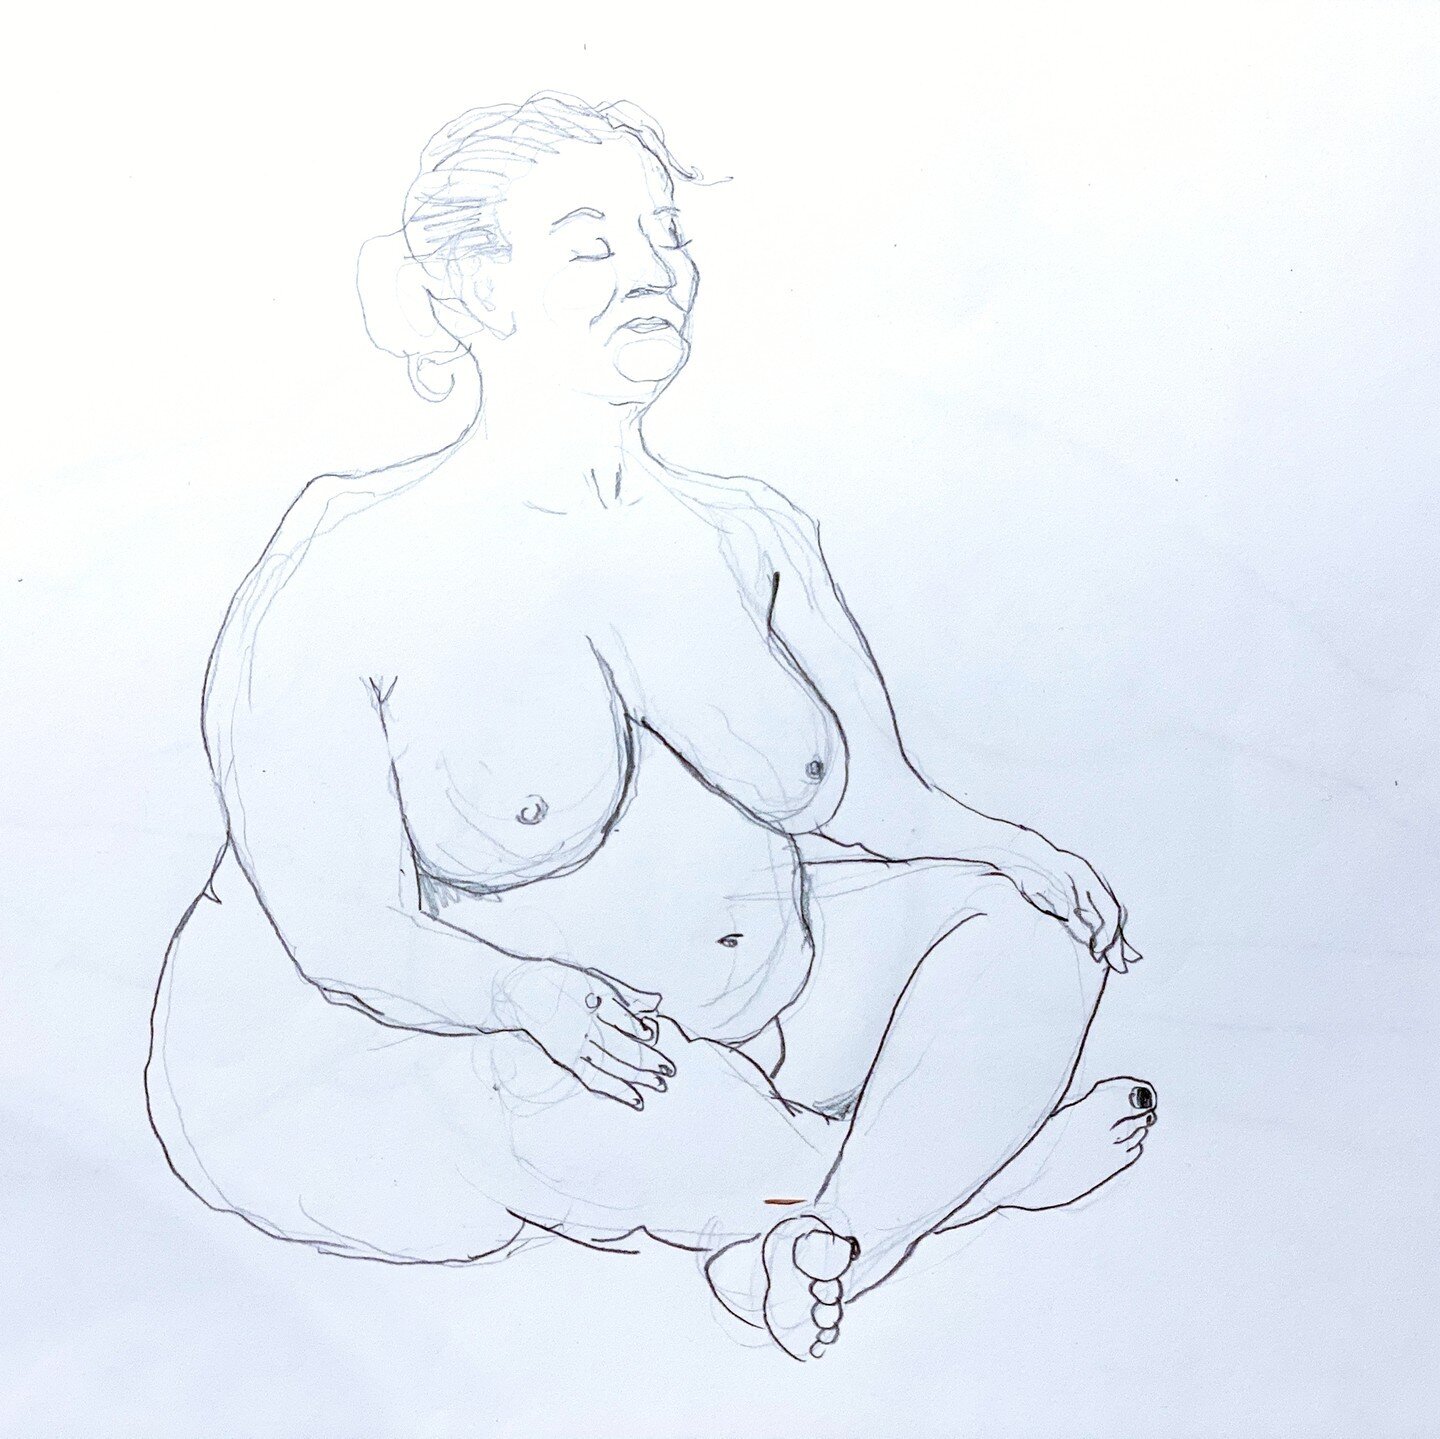 Drawing is meditation. Come and get in the zen zone with us tomorrow night!⁠
⁠
https://www.damienlucassculpture.com/life-drawing-byron⁠
.⁠
Currently, we're limiting reserved numbers, so your reservation will help us manage class size as well as ensur